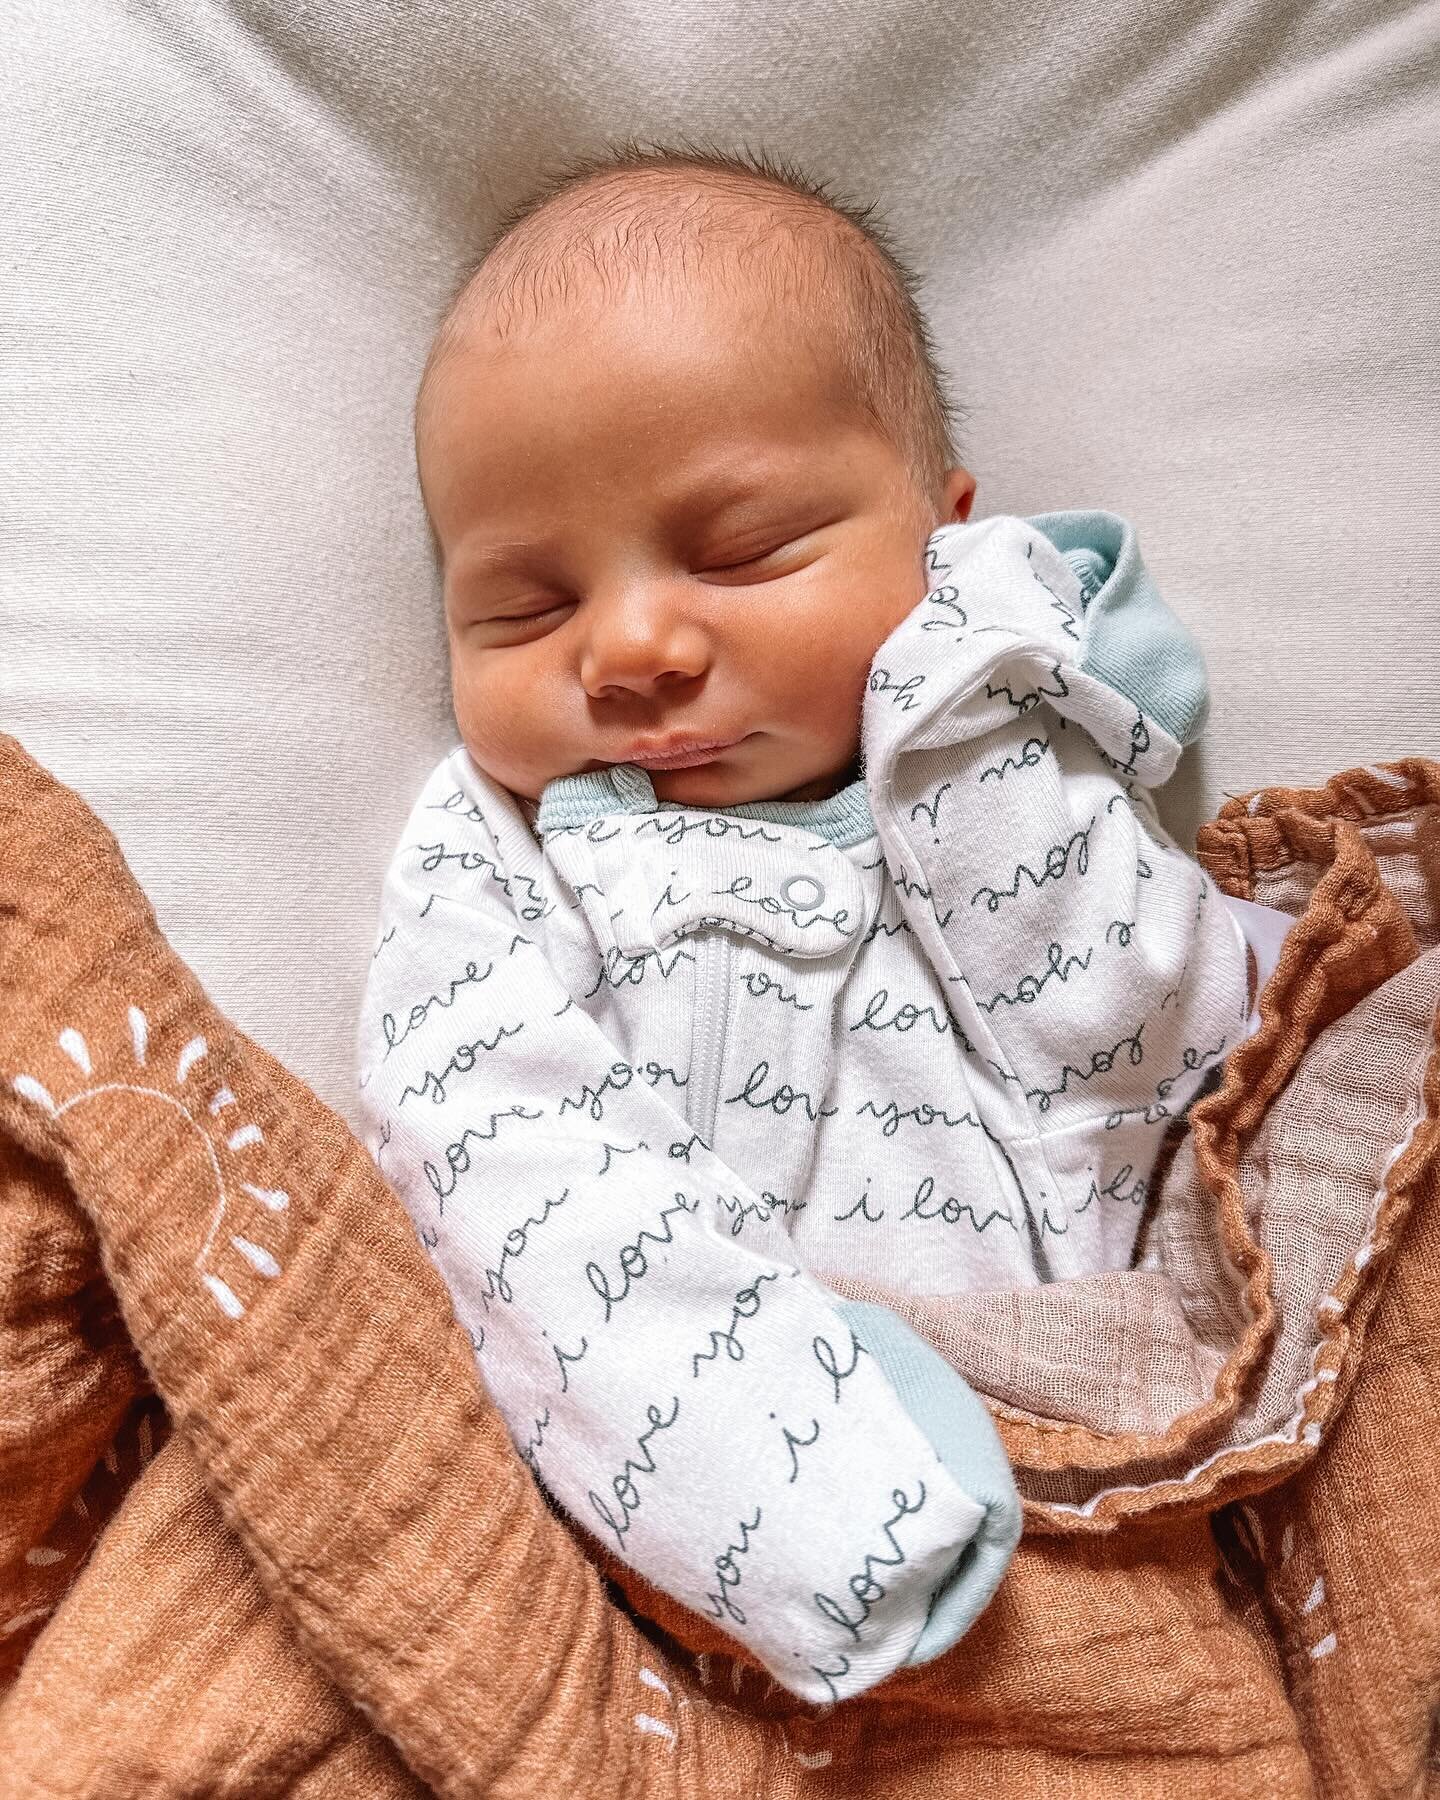 Welcome home, Jack. 🤍

A little glimpse of what our first six days have been like as a family of four. 

Jack Christopher joined us Wednesday afternoon. Since then we&rsquo;ve been in a beautiful state of transition.

I&rsquo;ve never felt so much l